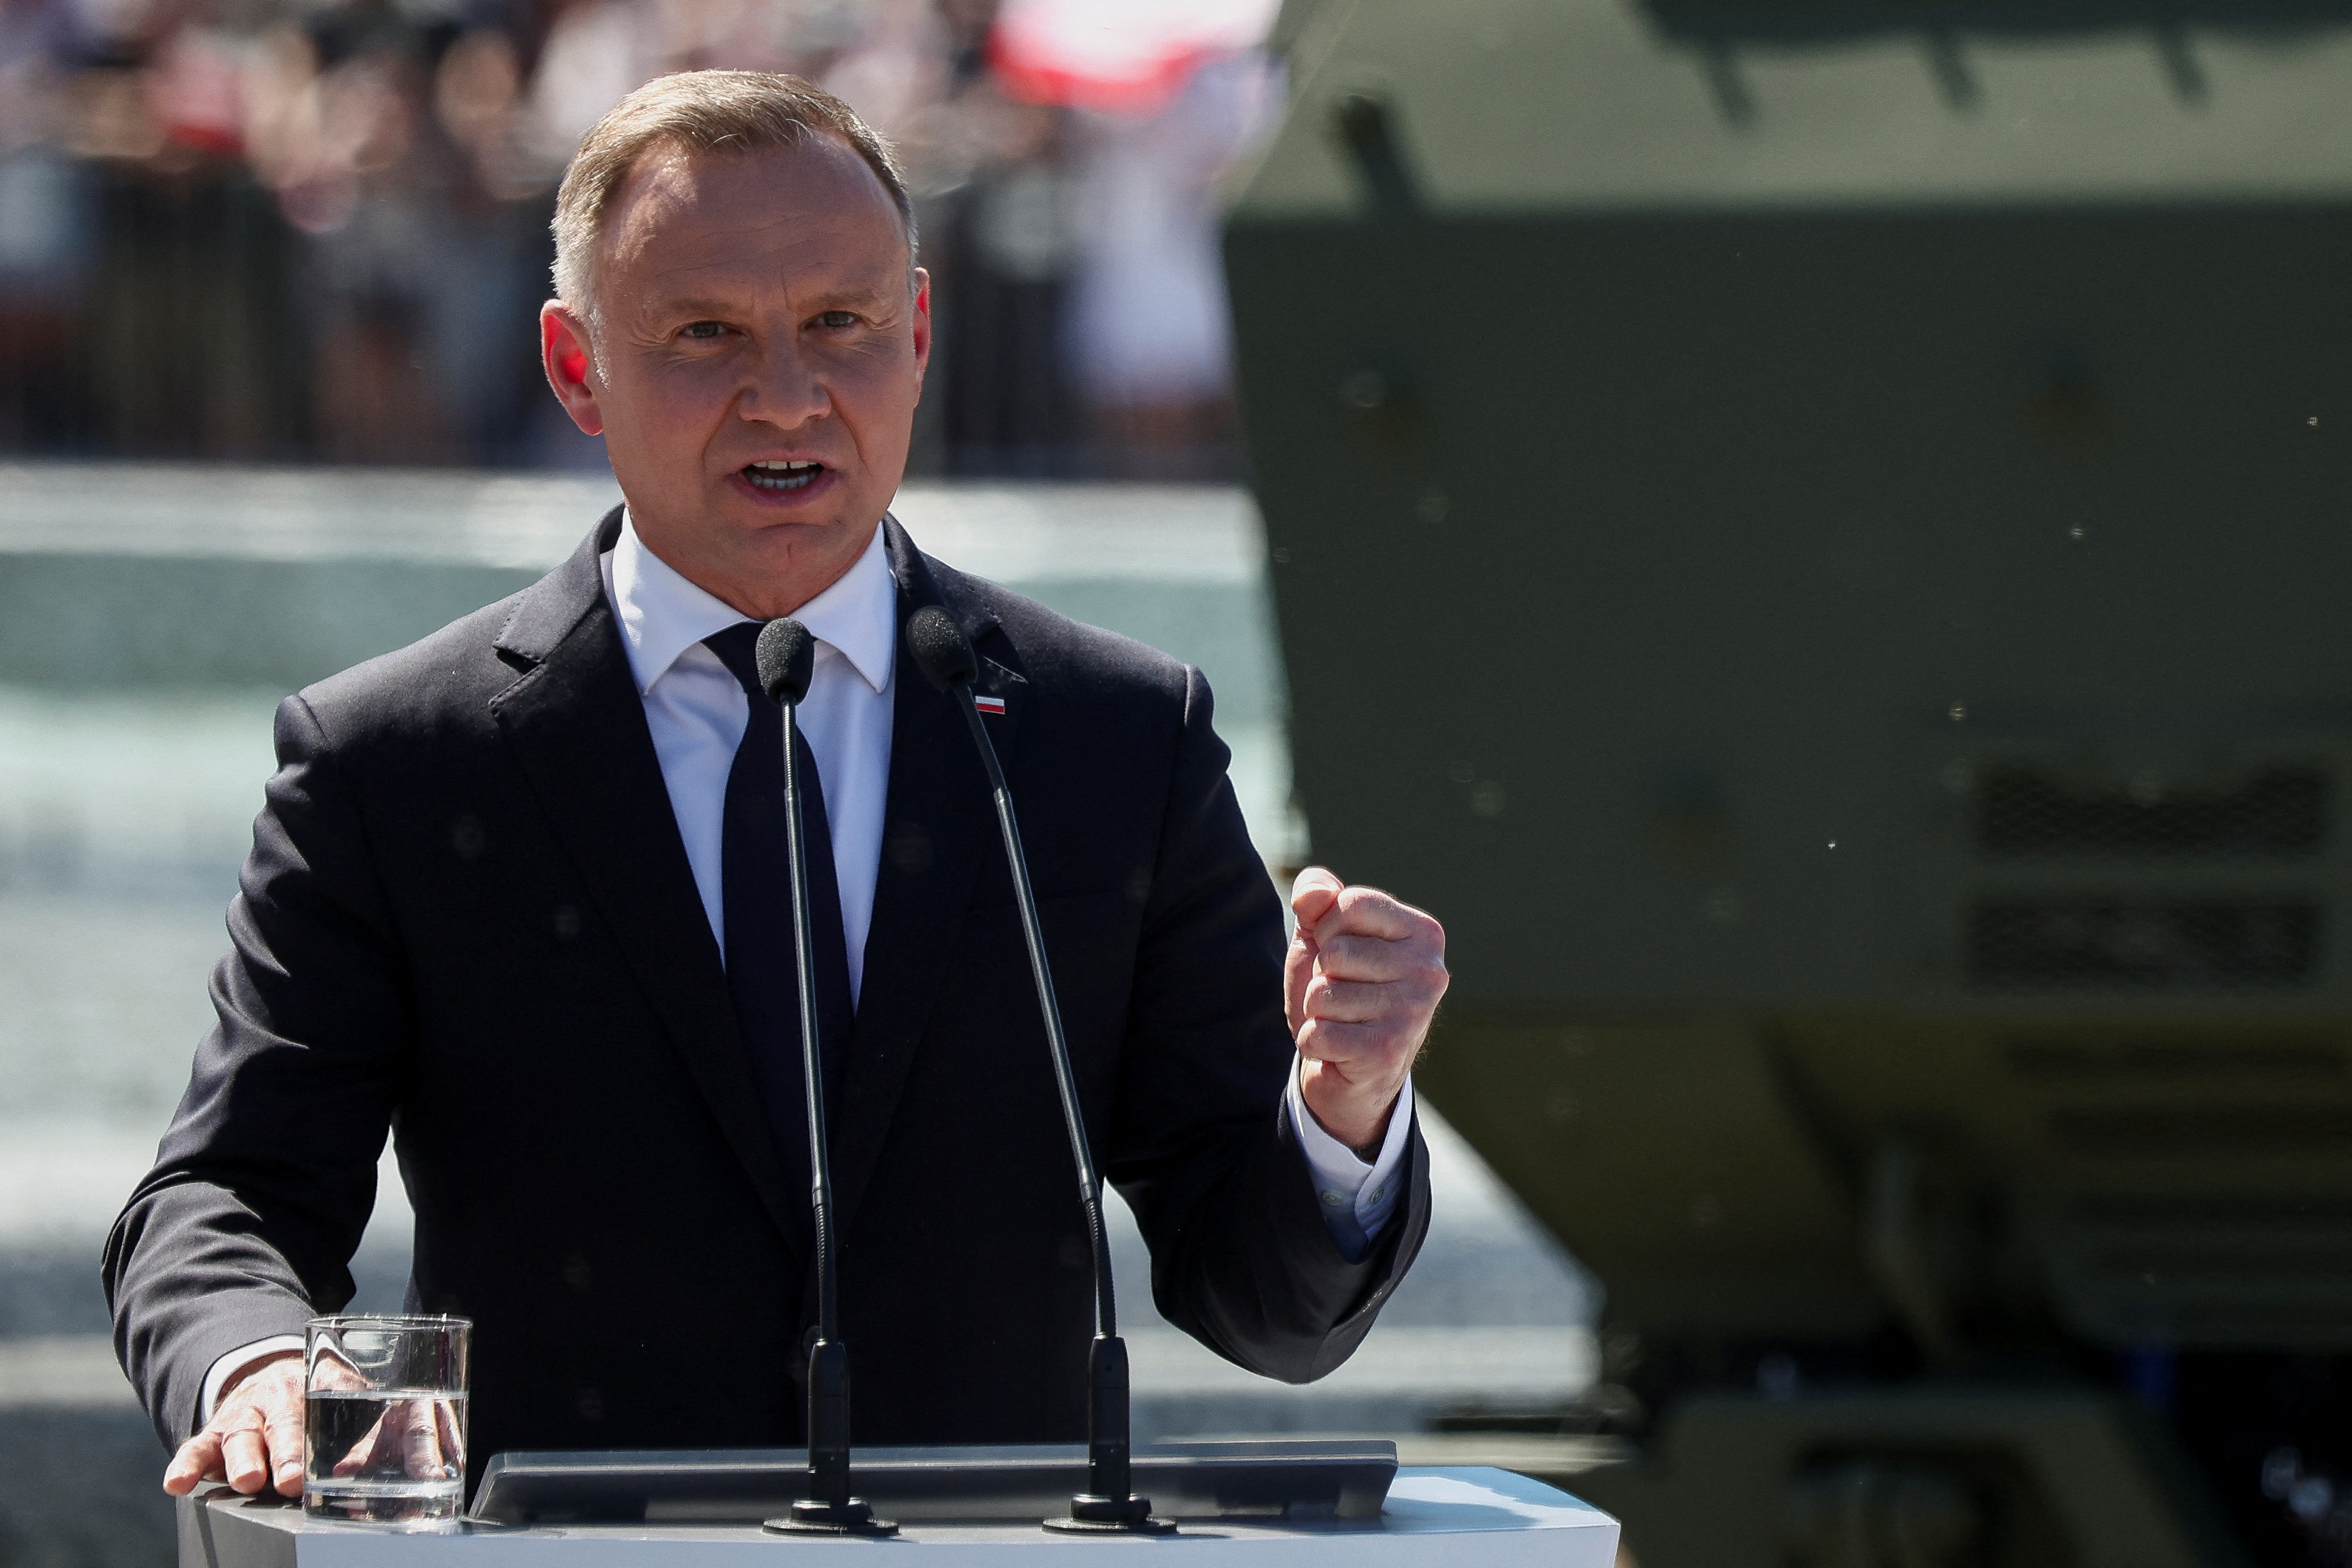 Polish president delays appointing new government, Poland